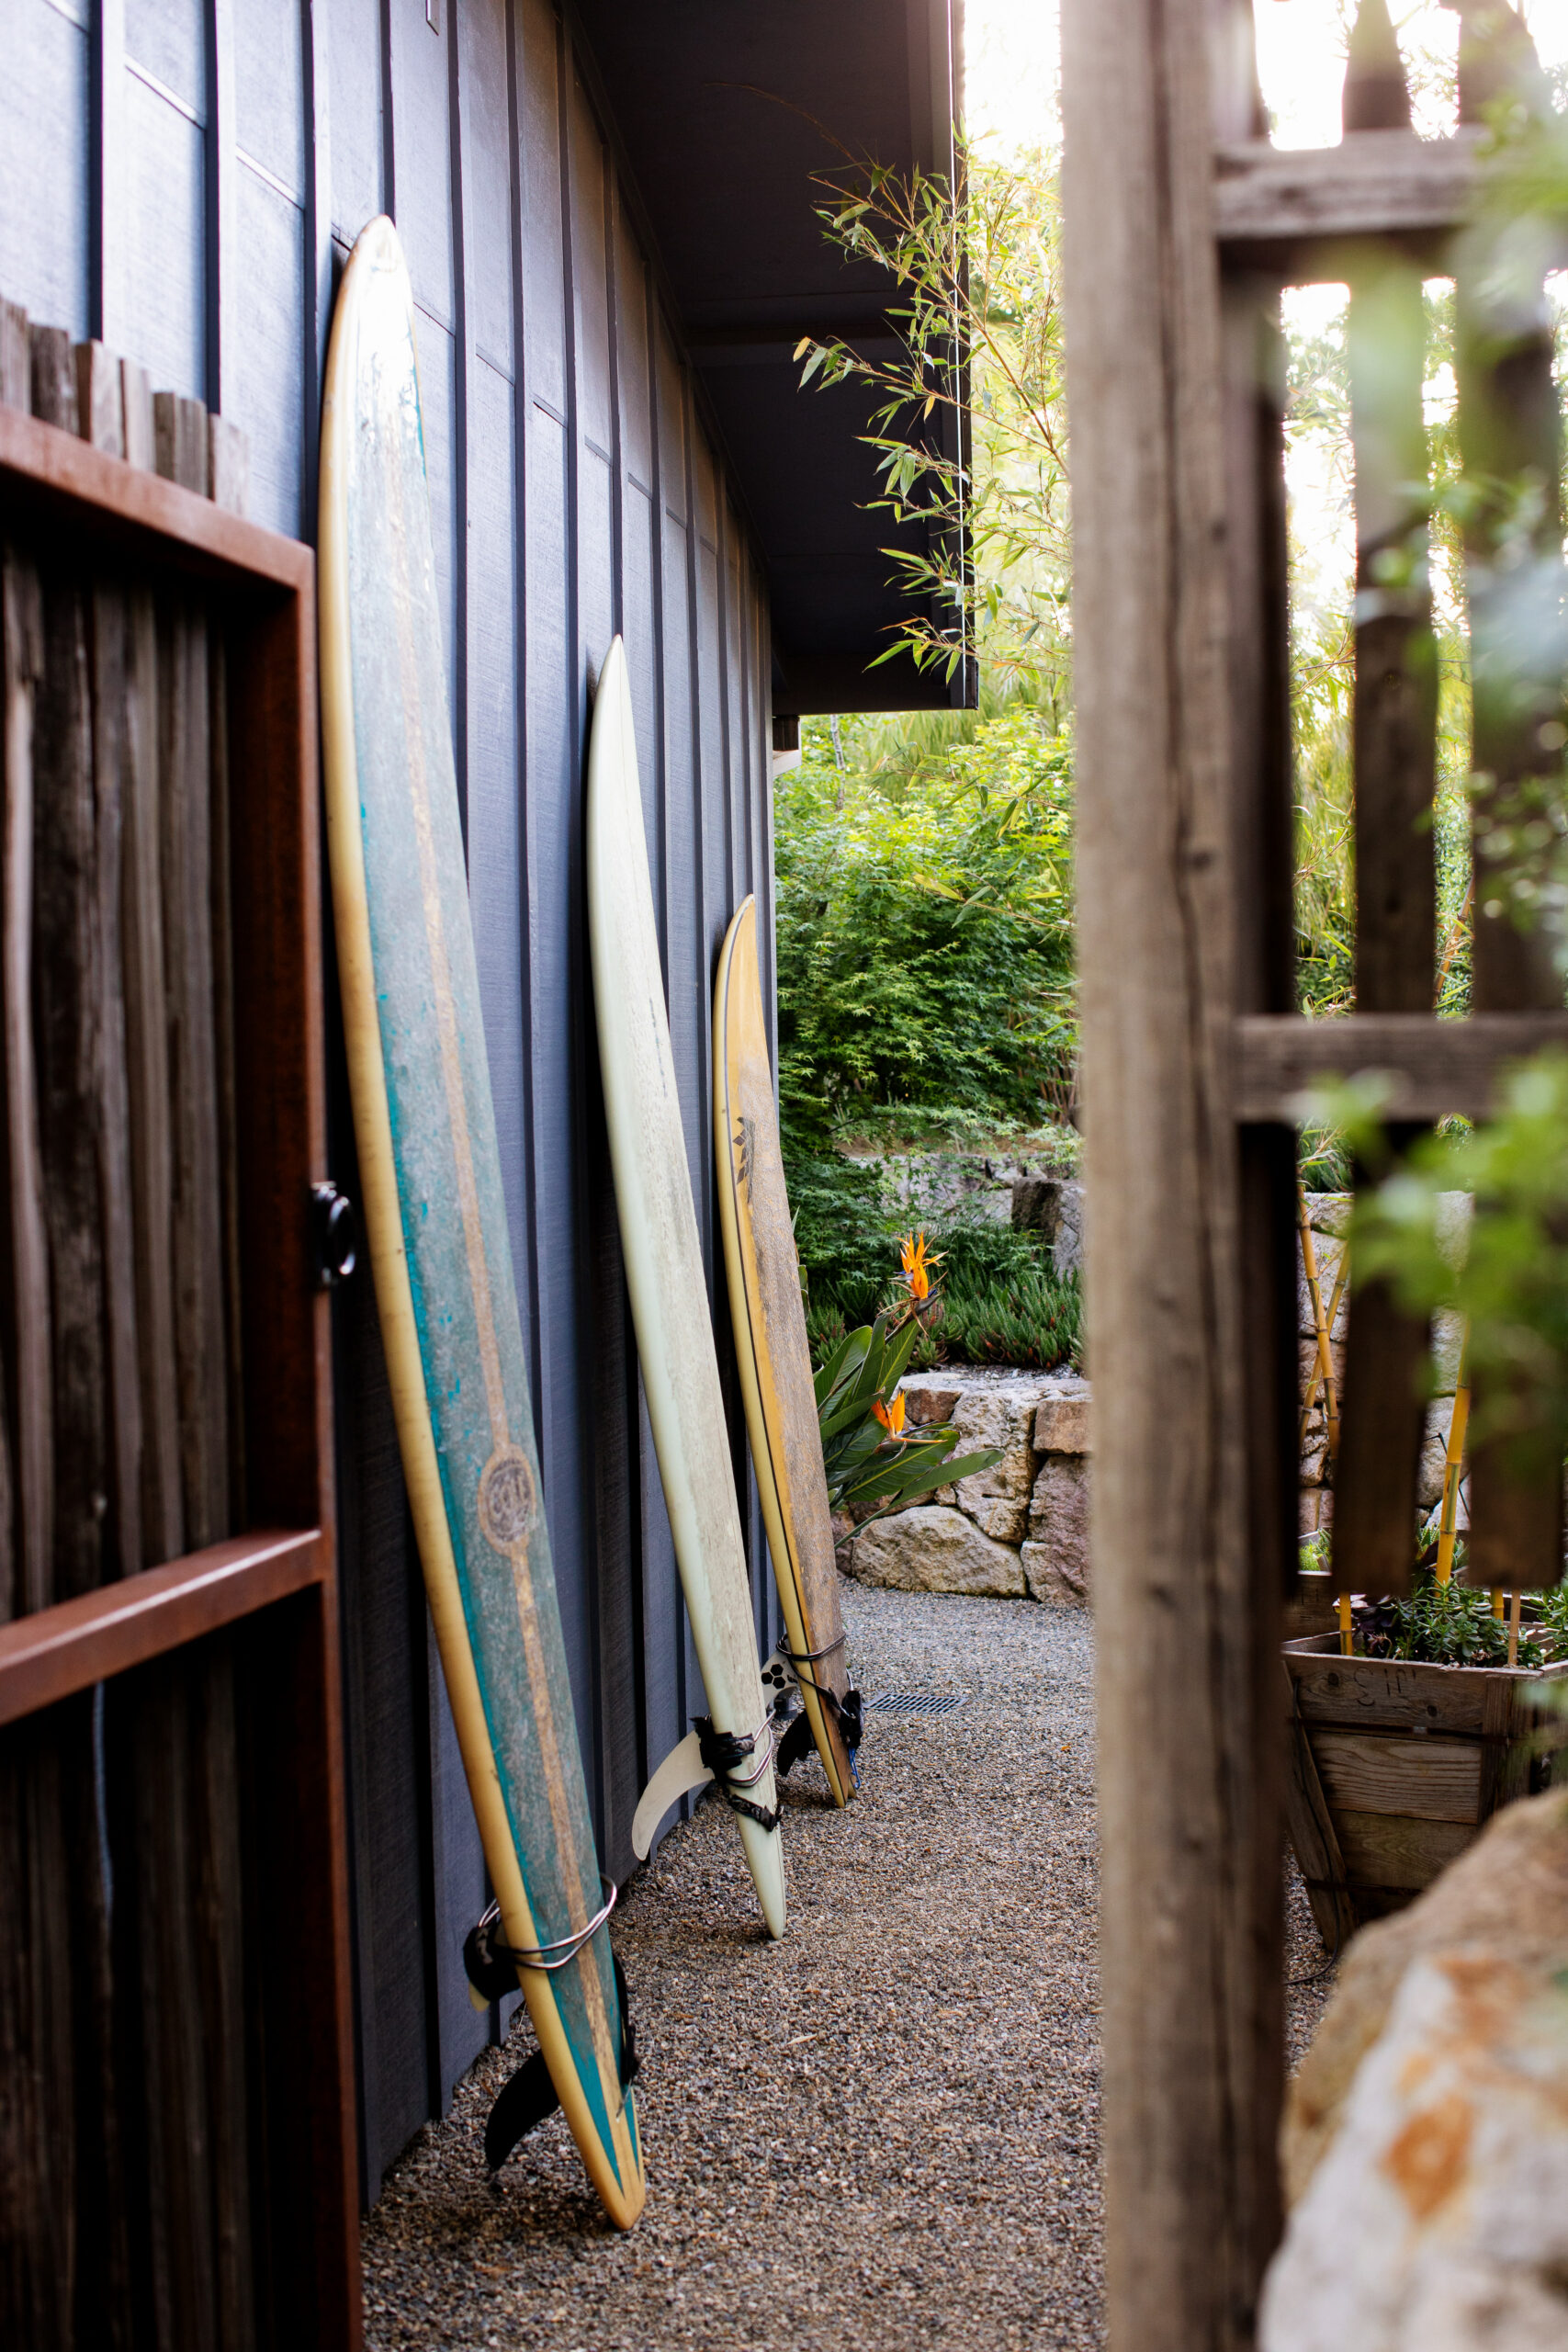 Surfboards at the ready in the garden. (Eileen Roche)